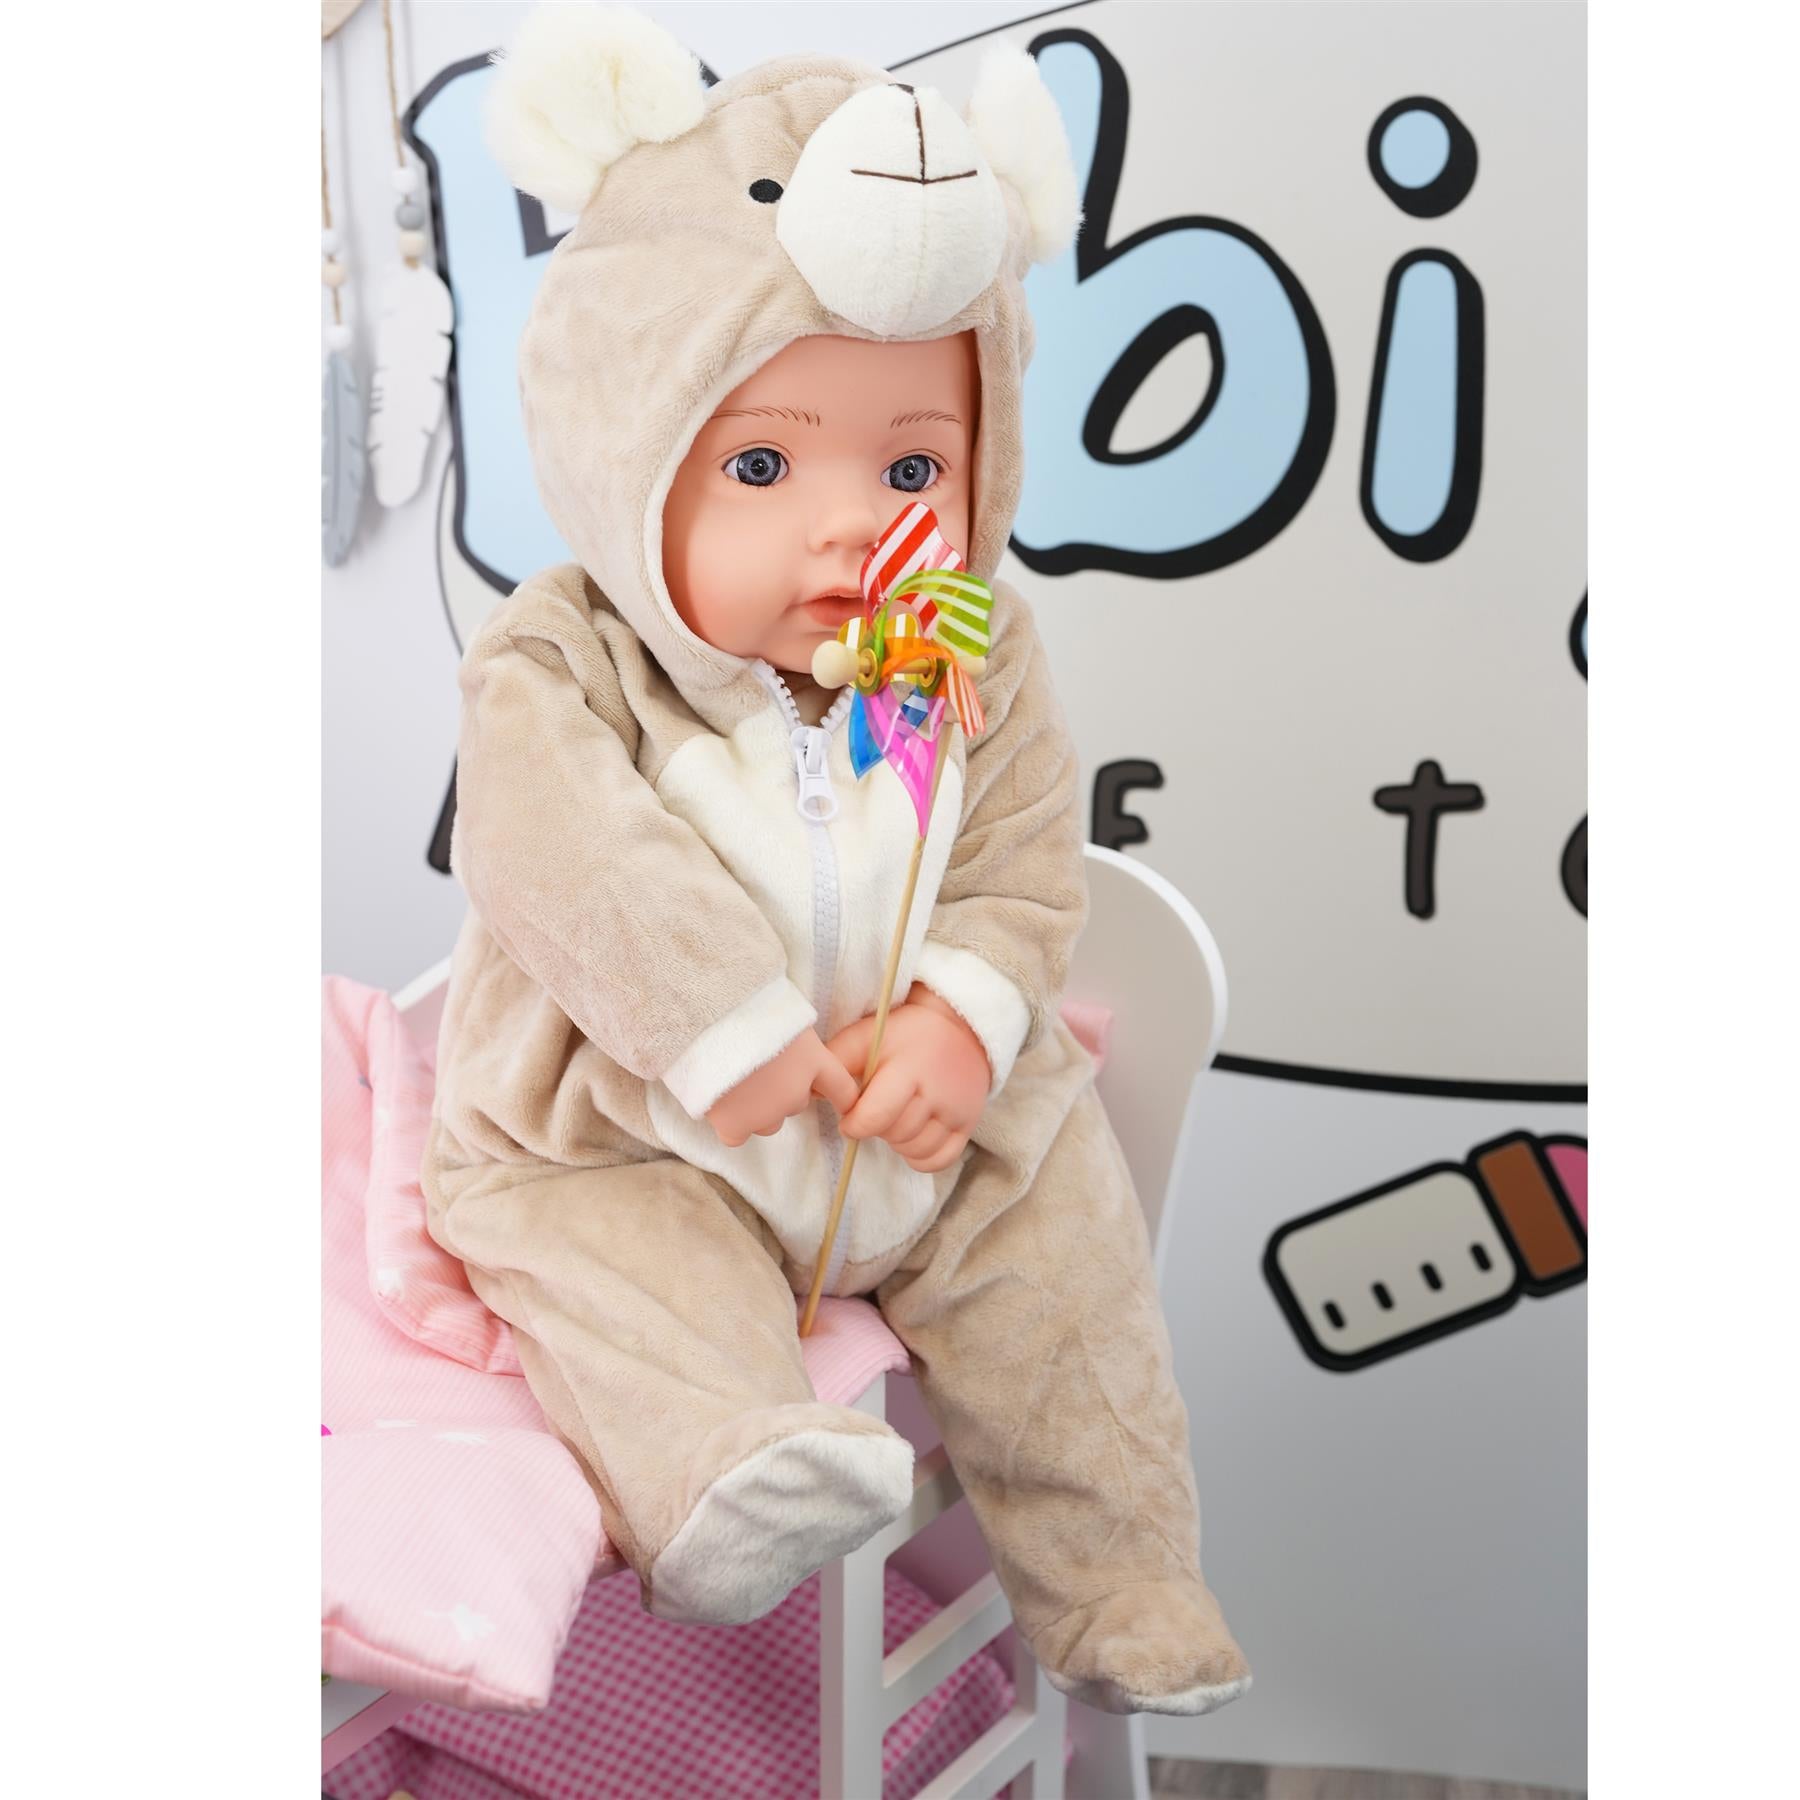 Baby Doll Girl Clothes Set Of Two Outfits Suitable For 20" Baby Doll by BiBi Doll - The Magic Toy Shop